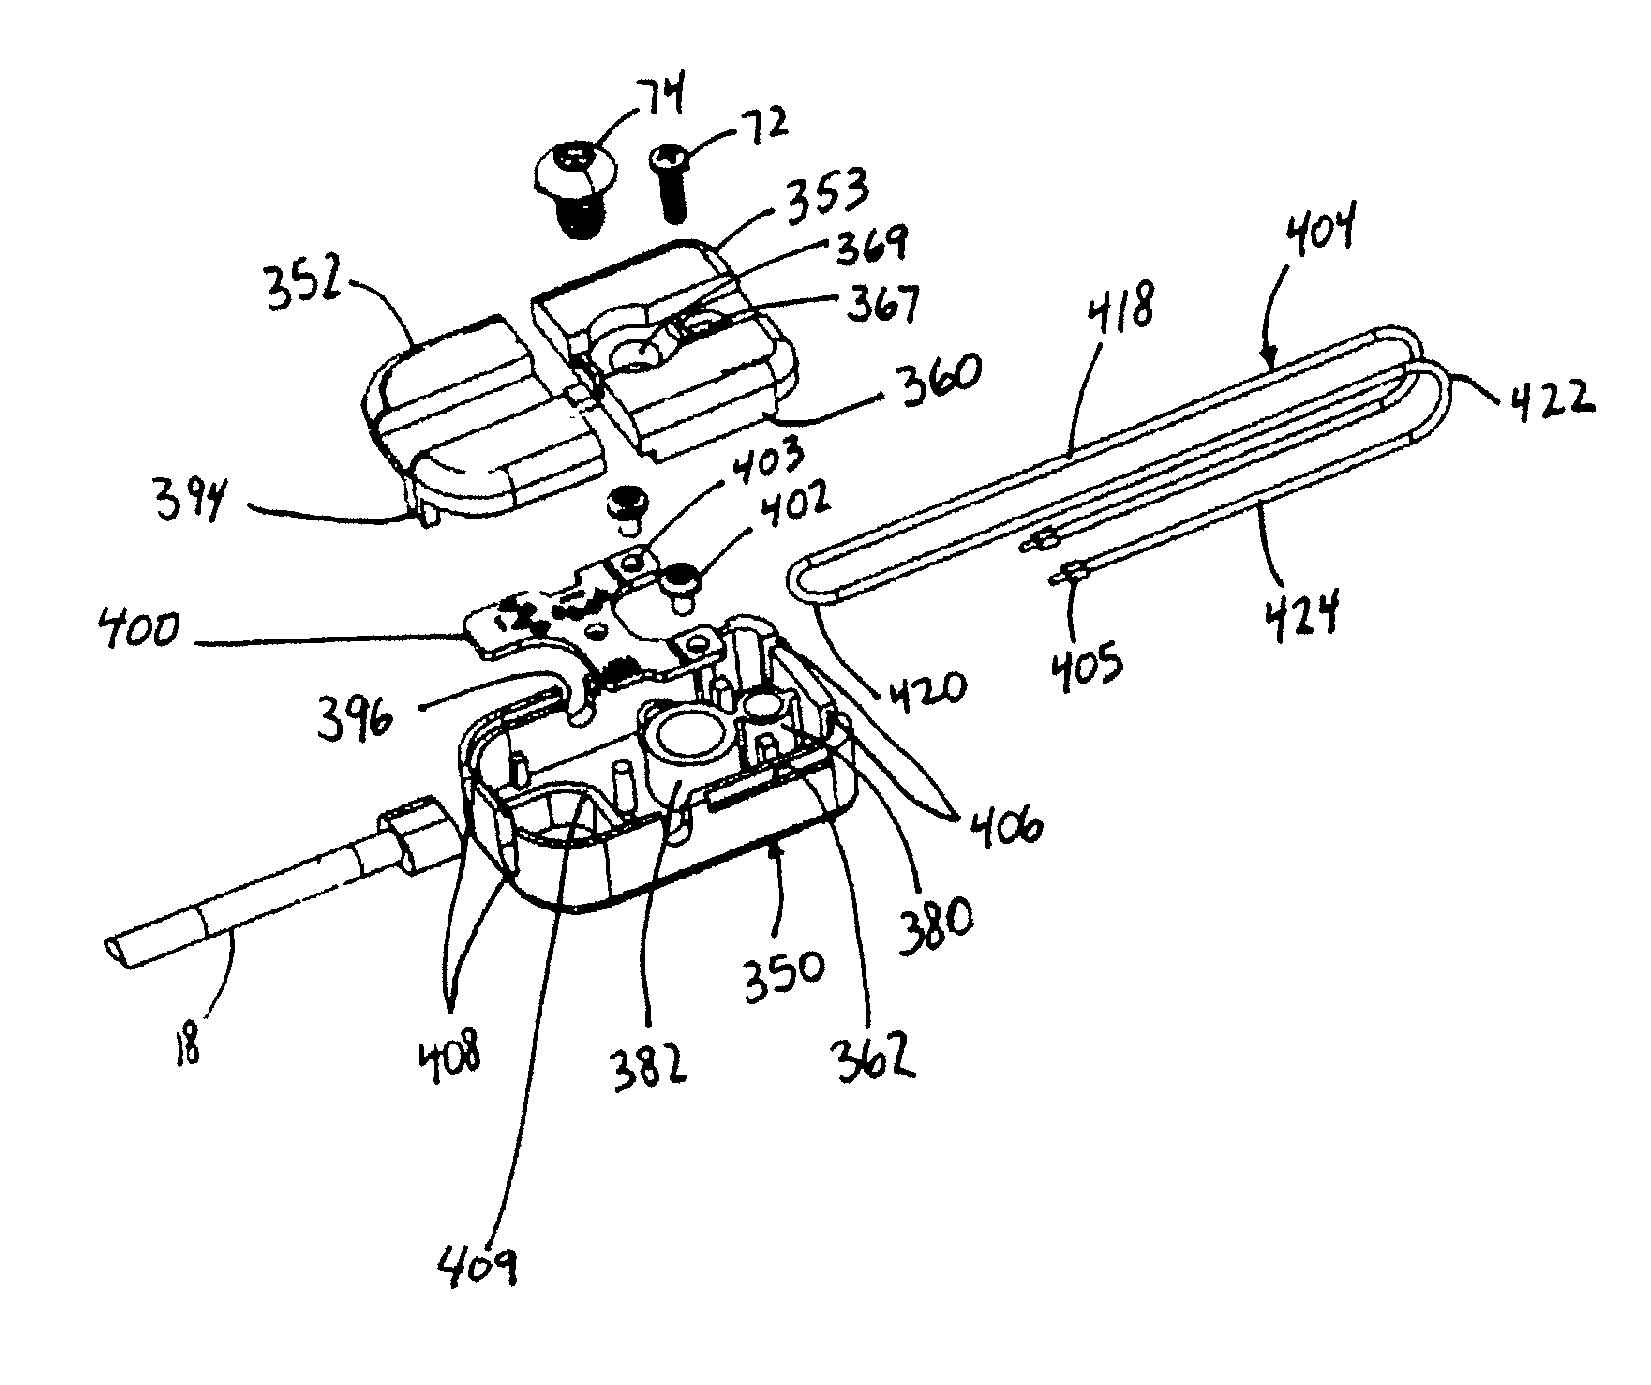 Cable assembly for securing hinged products